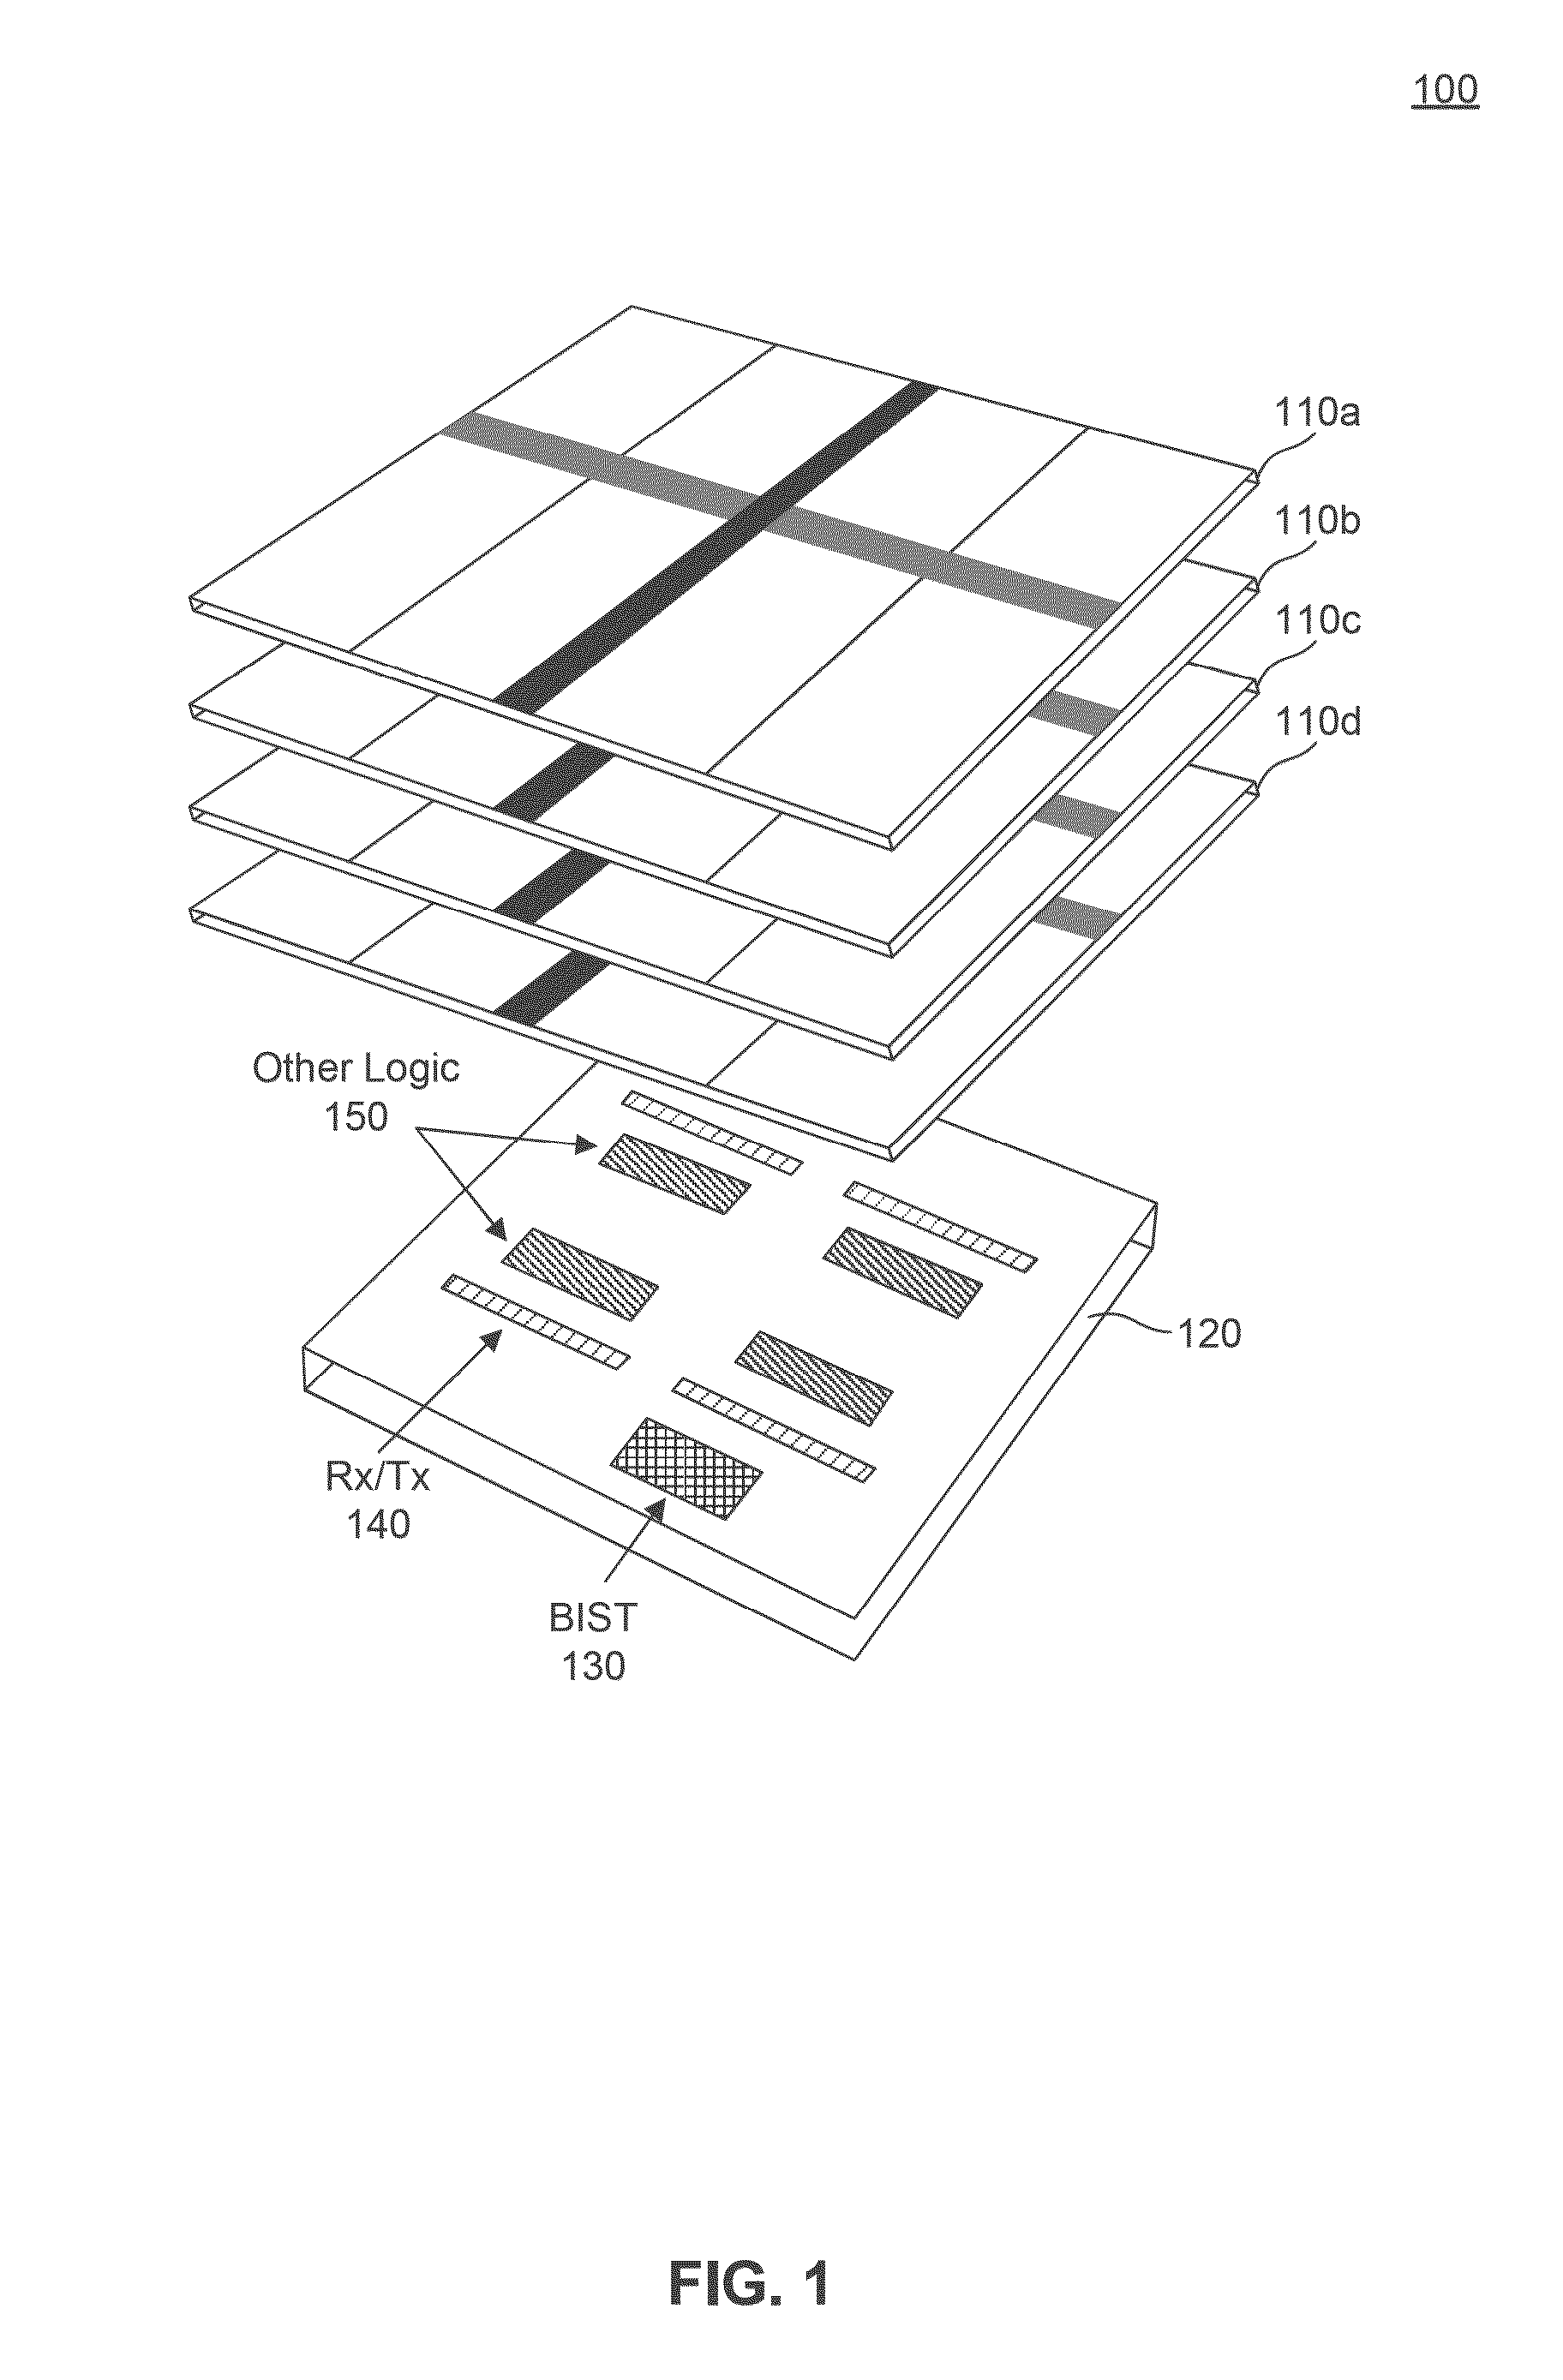 Compound Memory Operations in a Logic Layer of a Stacked Memory